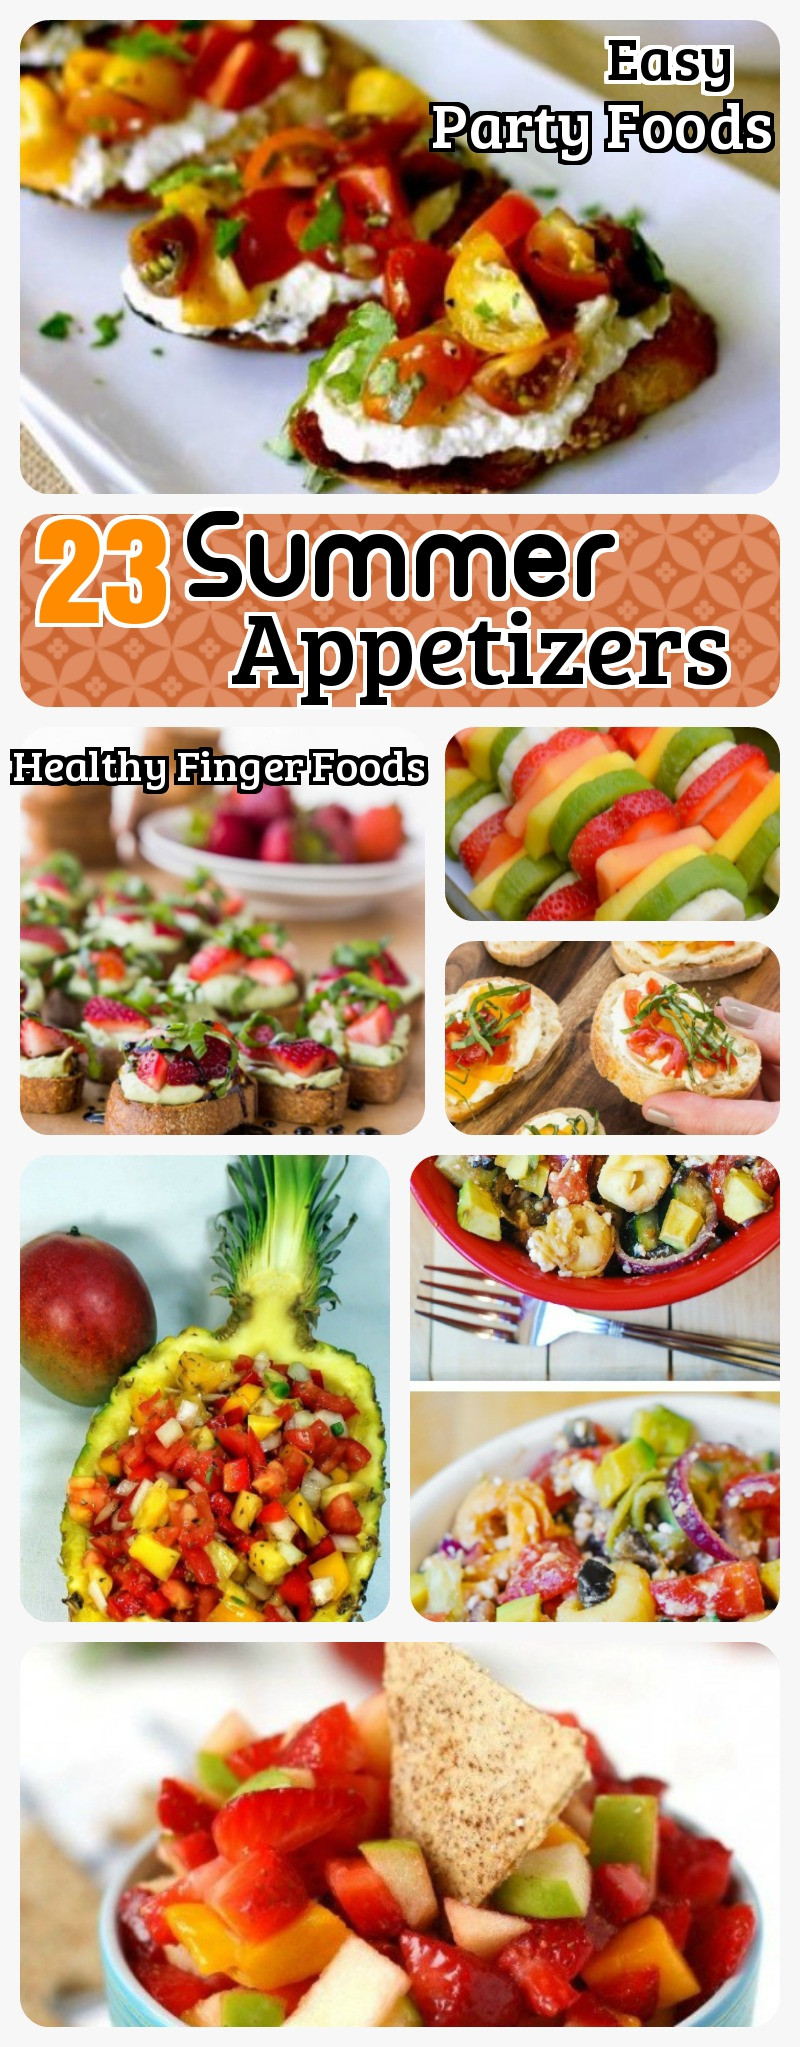 Finger Food Ideas For Summer Party
 Scorching Summer 23 Summer Appetizers for Crowd DIY